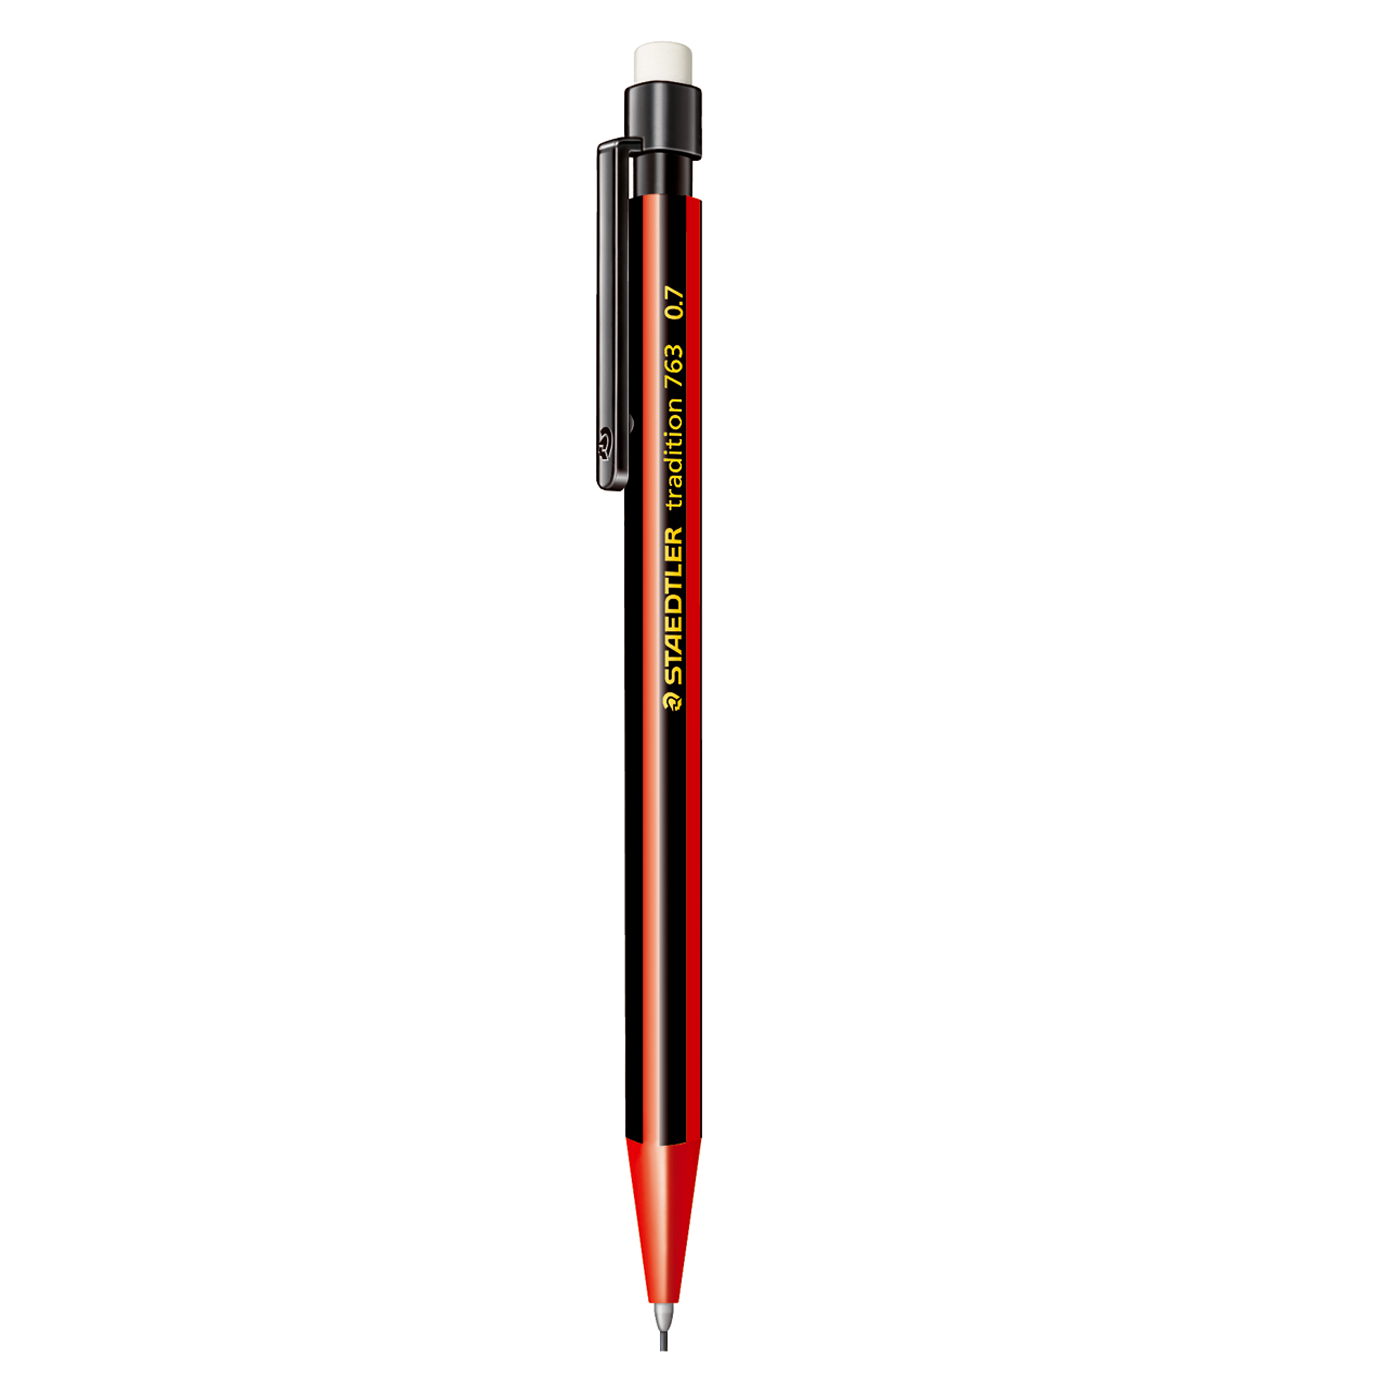 Staedtler-Tridition-Mechanical-Pencil-763-Triangular-0.7-mm